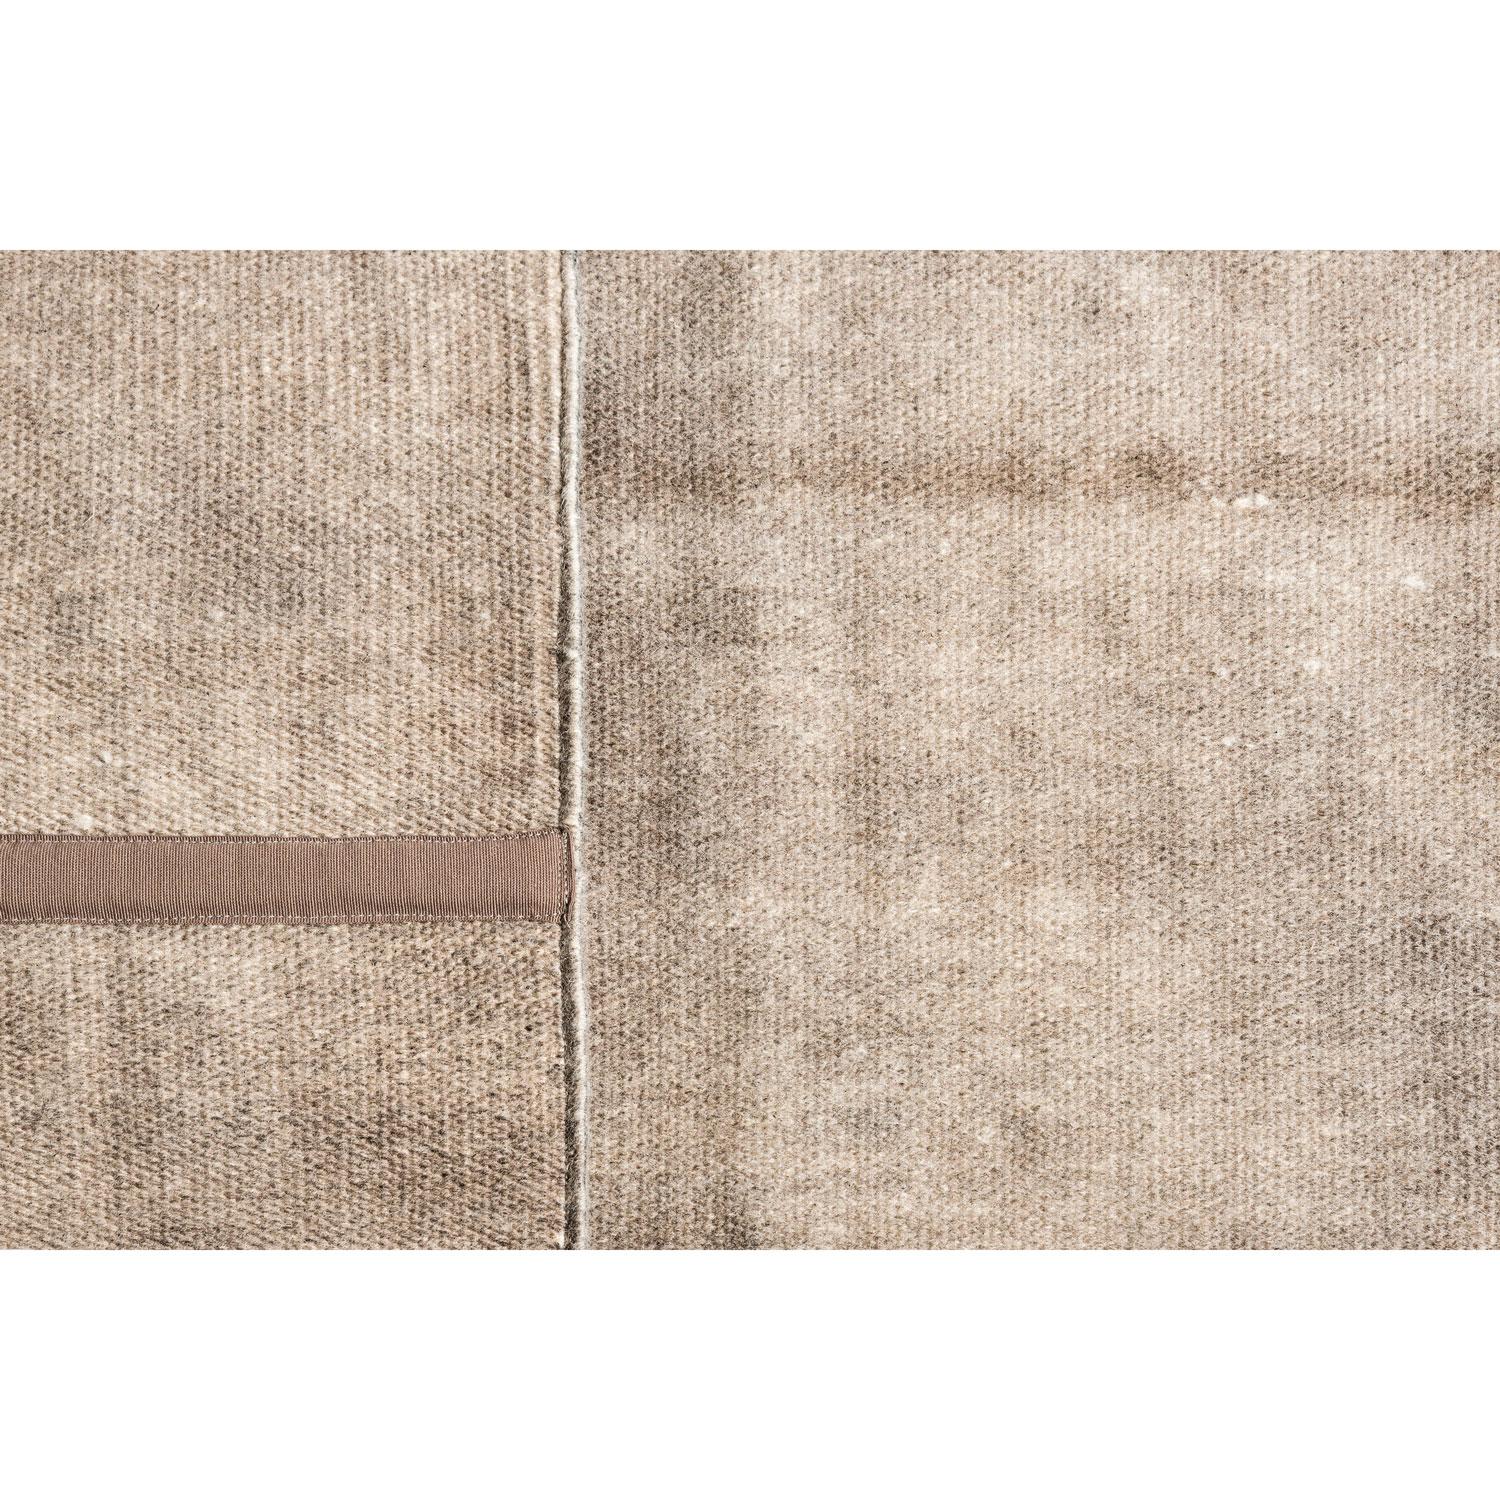 21st Century Wool Thin Natural Washable Grey Rug by Deanna Comellini 260x350 cm In New Condition For Sale In Bologna, IT